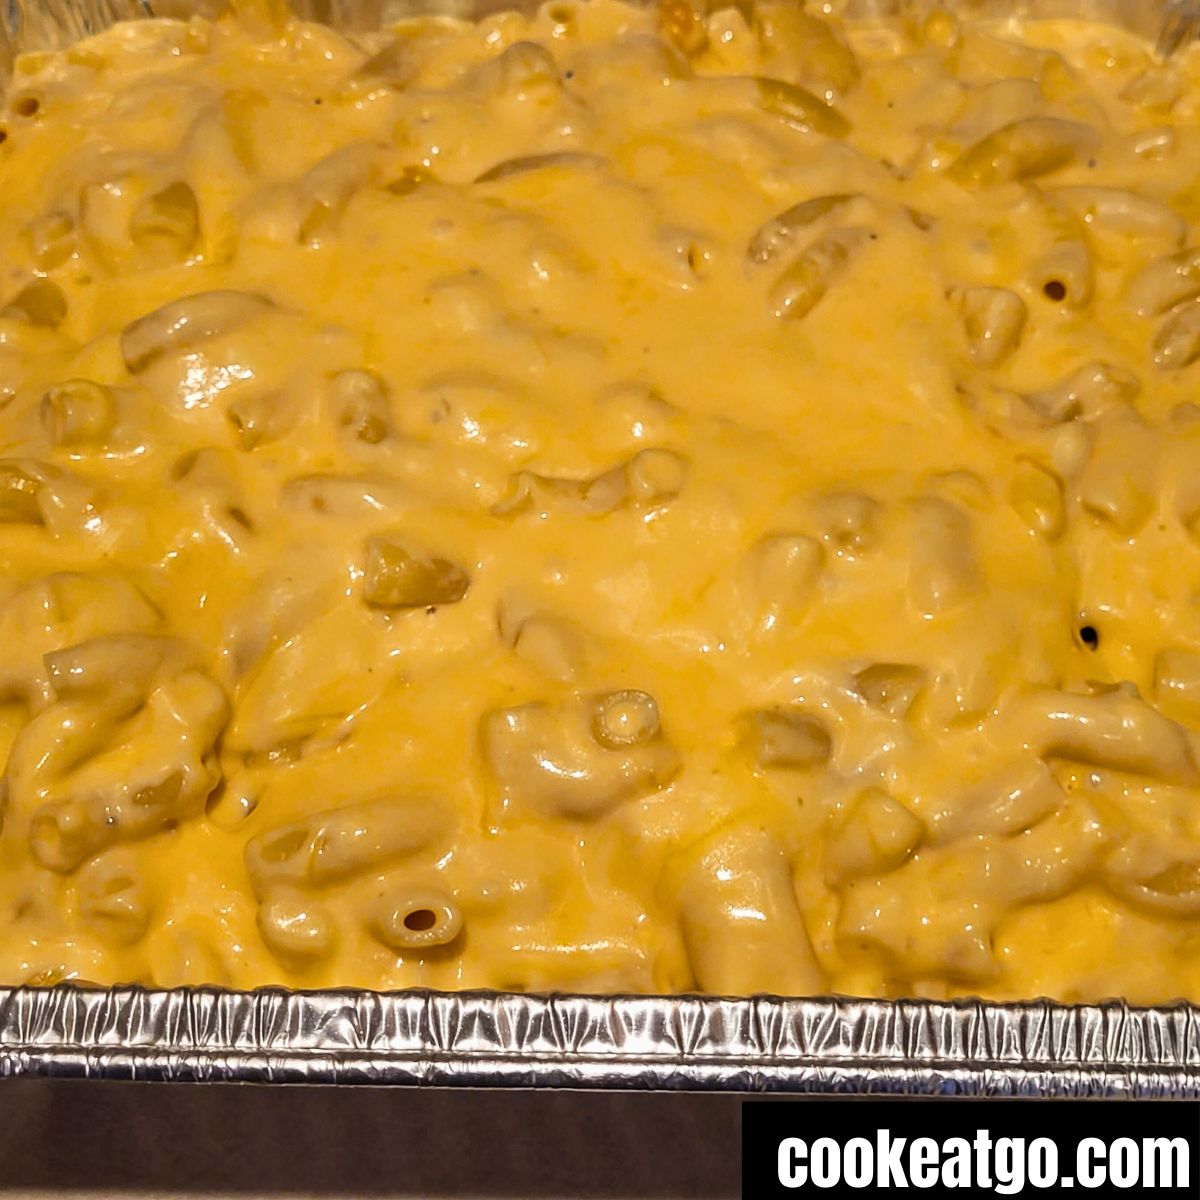 Melted Cheese over macaroni noodles in tin foil pan